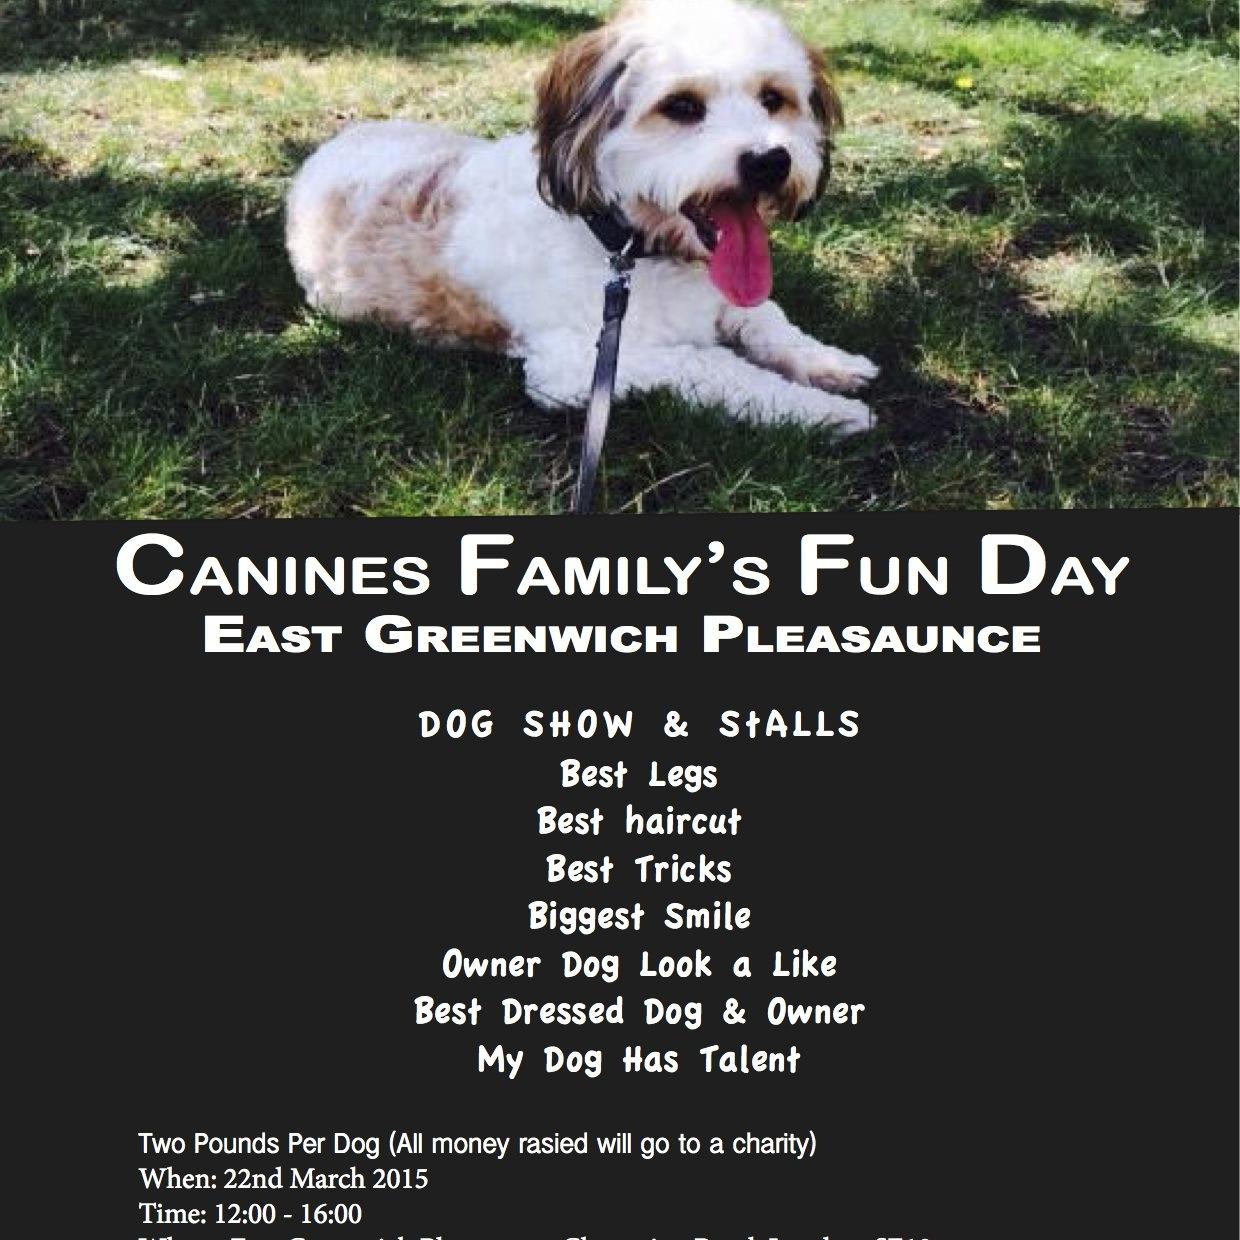 Bring everyone along to join in the fun at East Greenwich Pleasance for an open to all dog show & family fun day to raise money for animal charities 22/03/2014